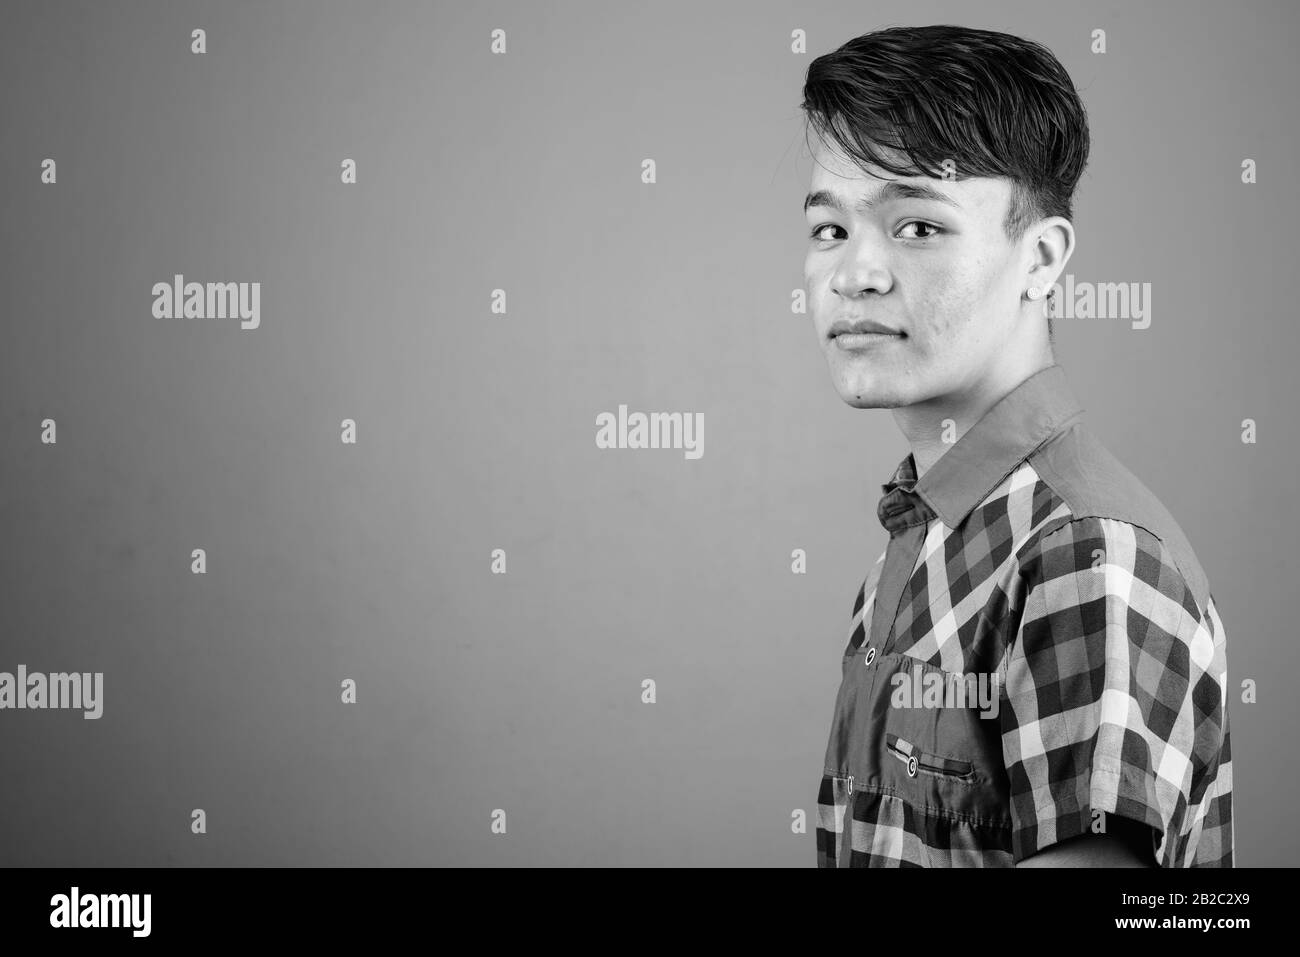 Portrait of young handsome Asian teenage boy Stock Photo